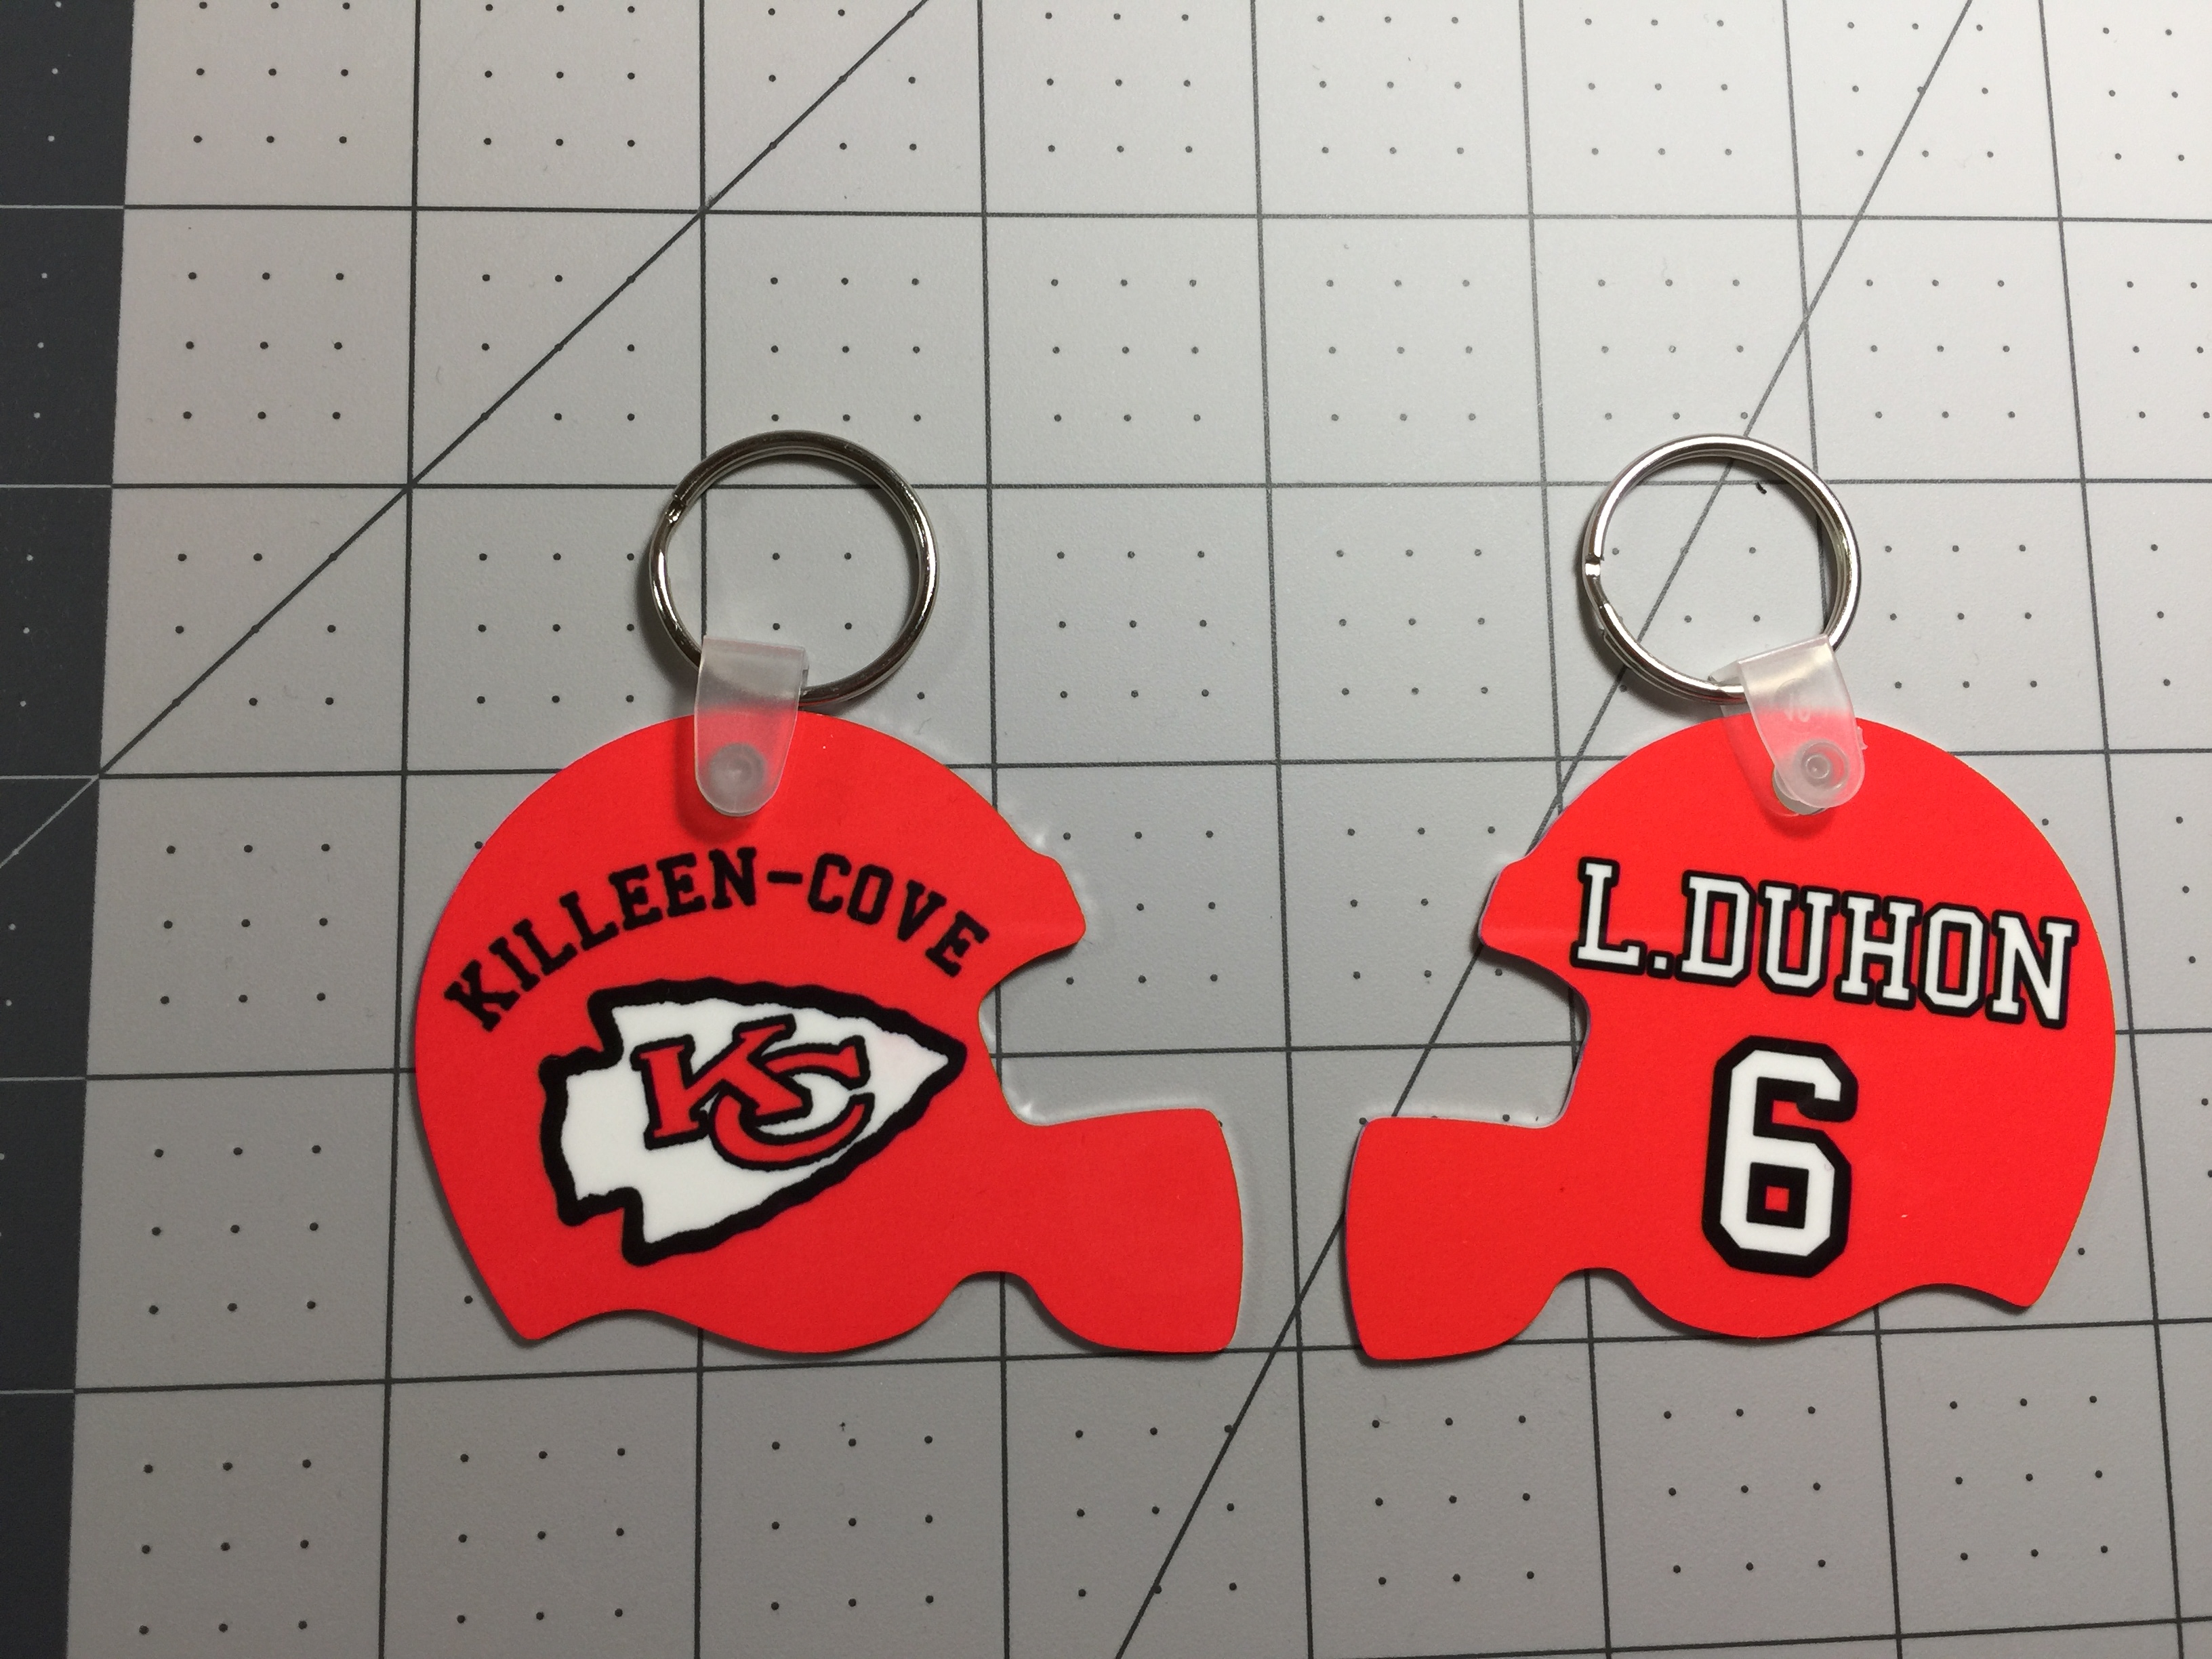 Key Chain made with sublimation printing